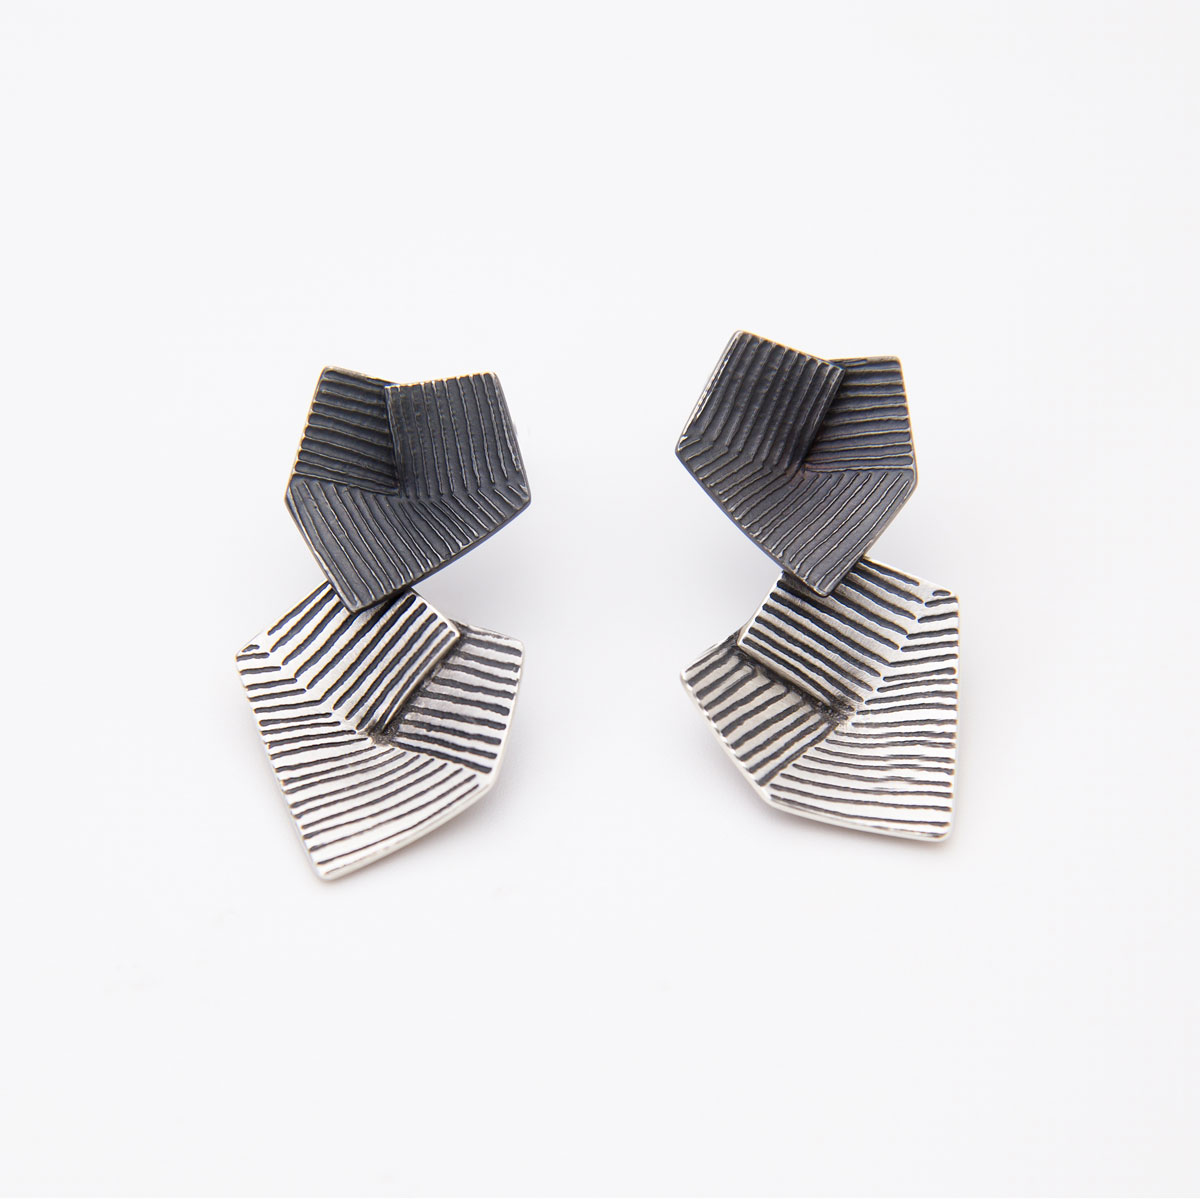 ‘Lines in Motion’ Silver and Black Drop Earrings